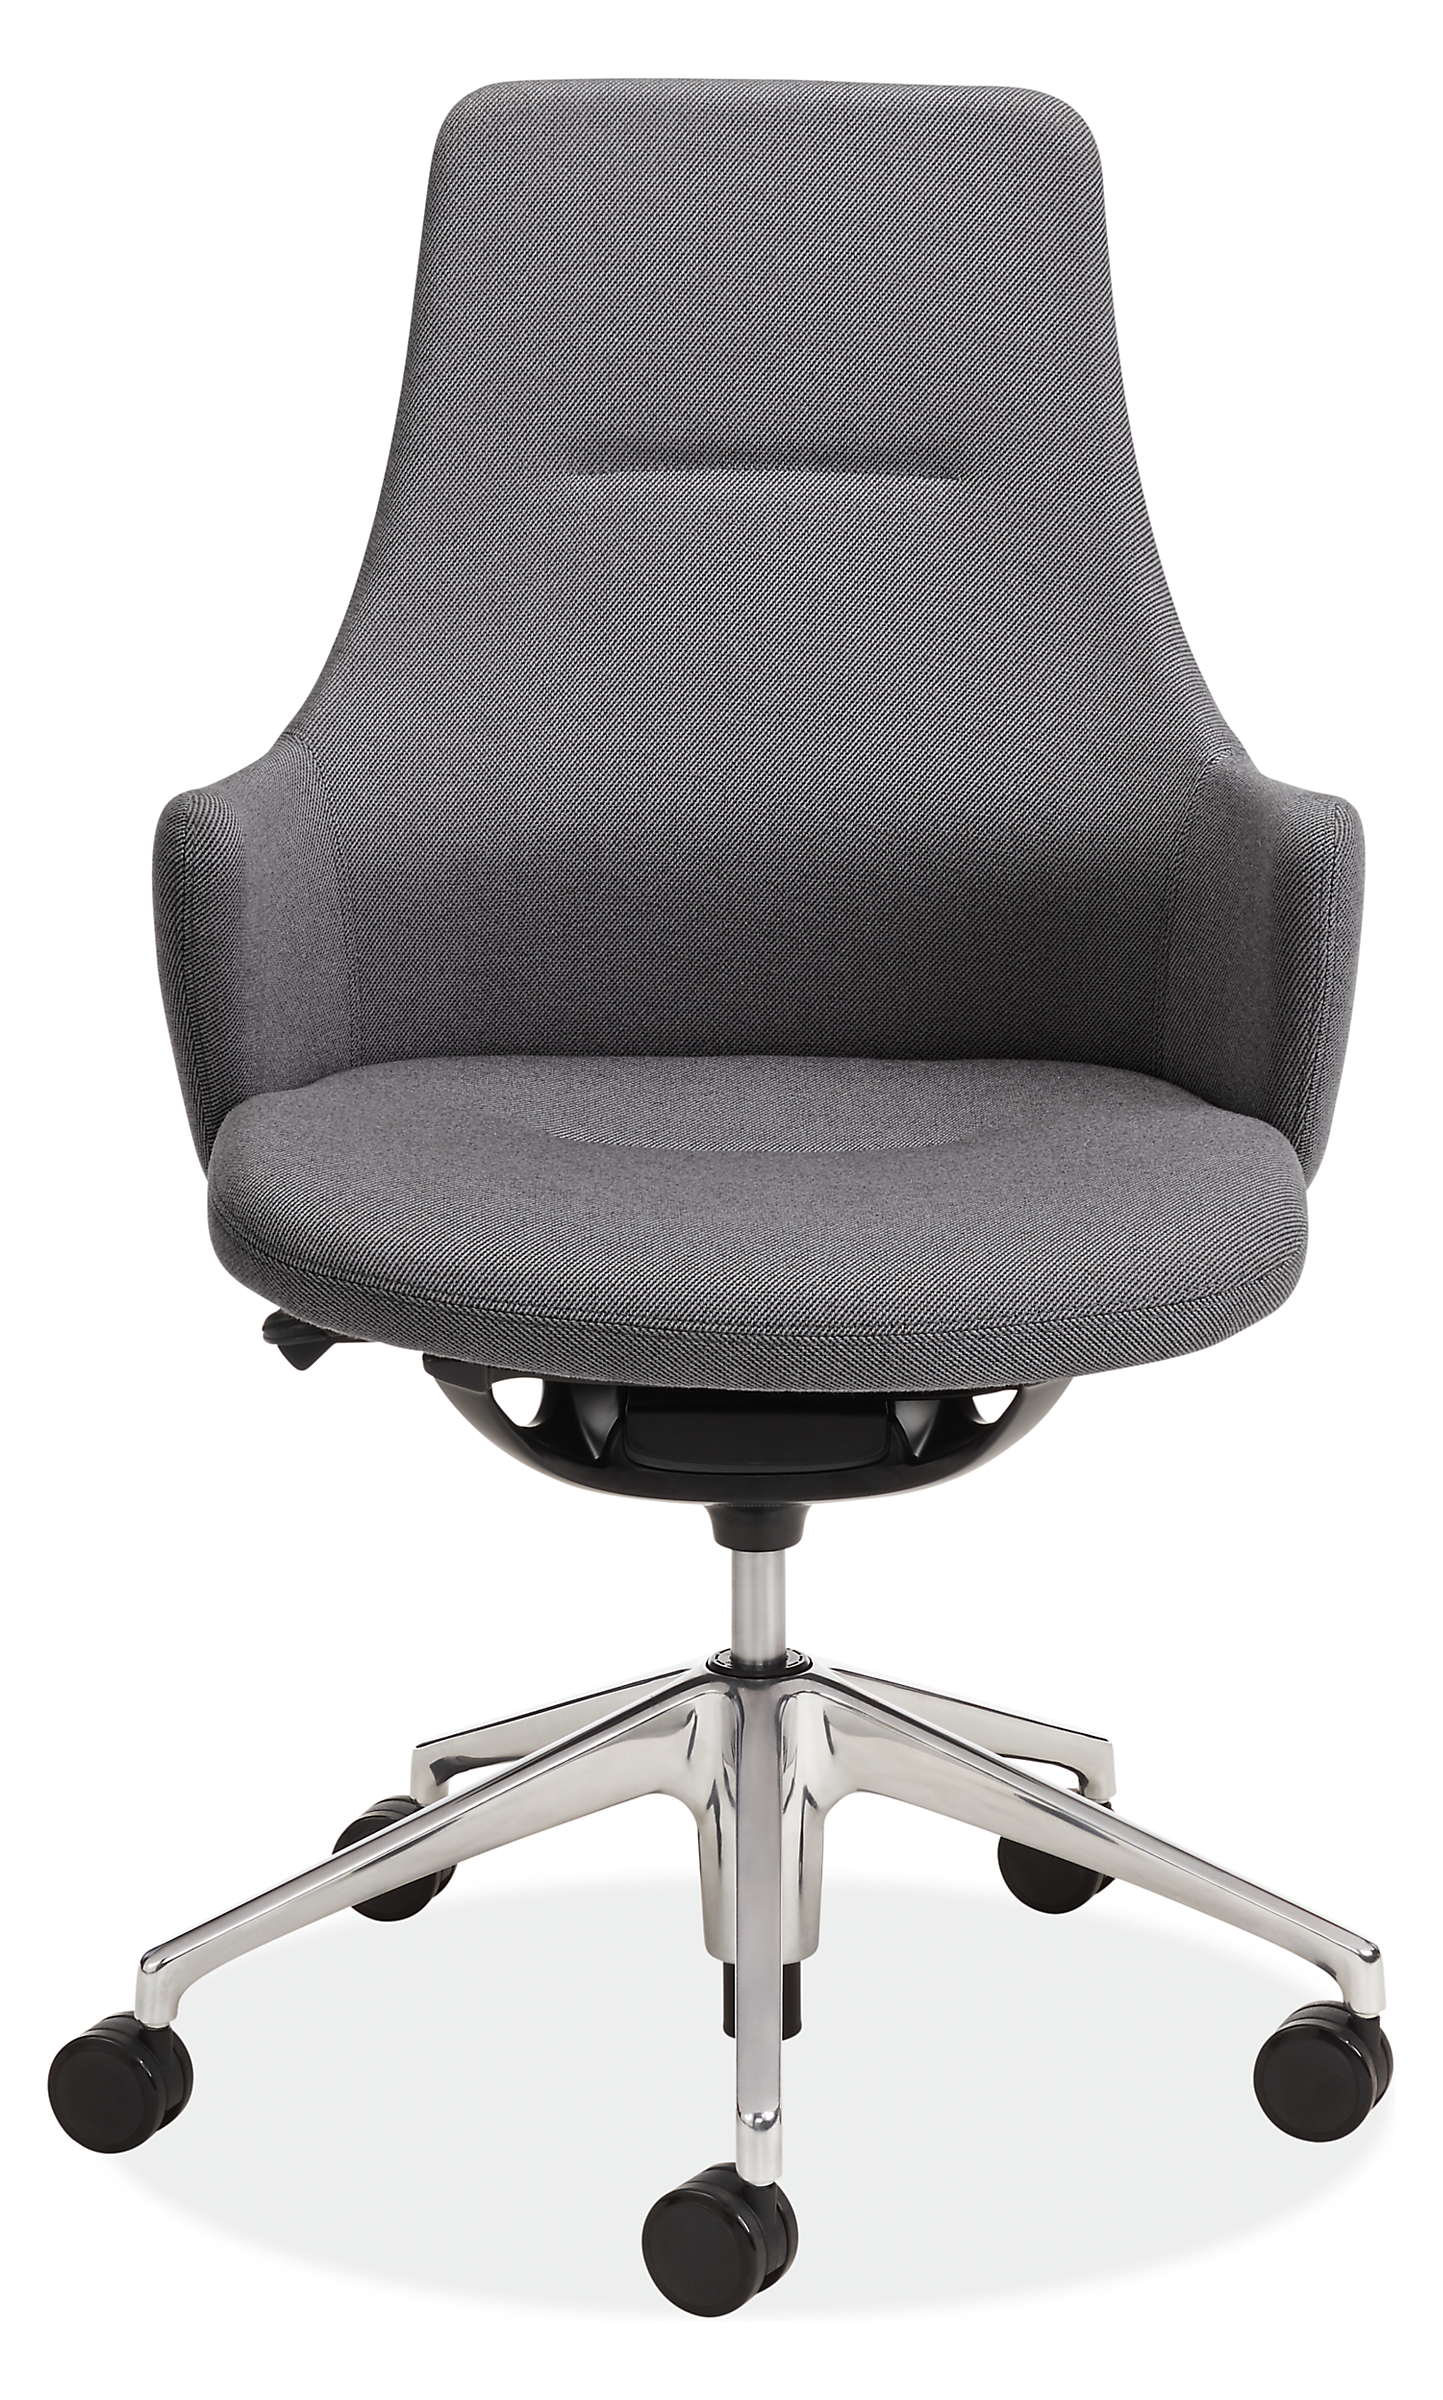 Front view of LW Office Chair in Polished Aluminum with Grey Twill Fabric.